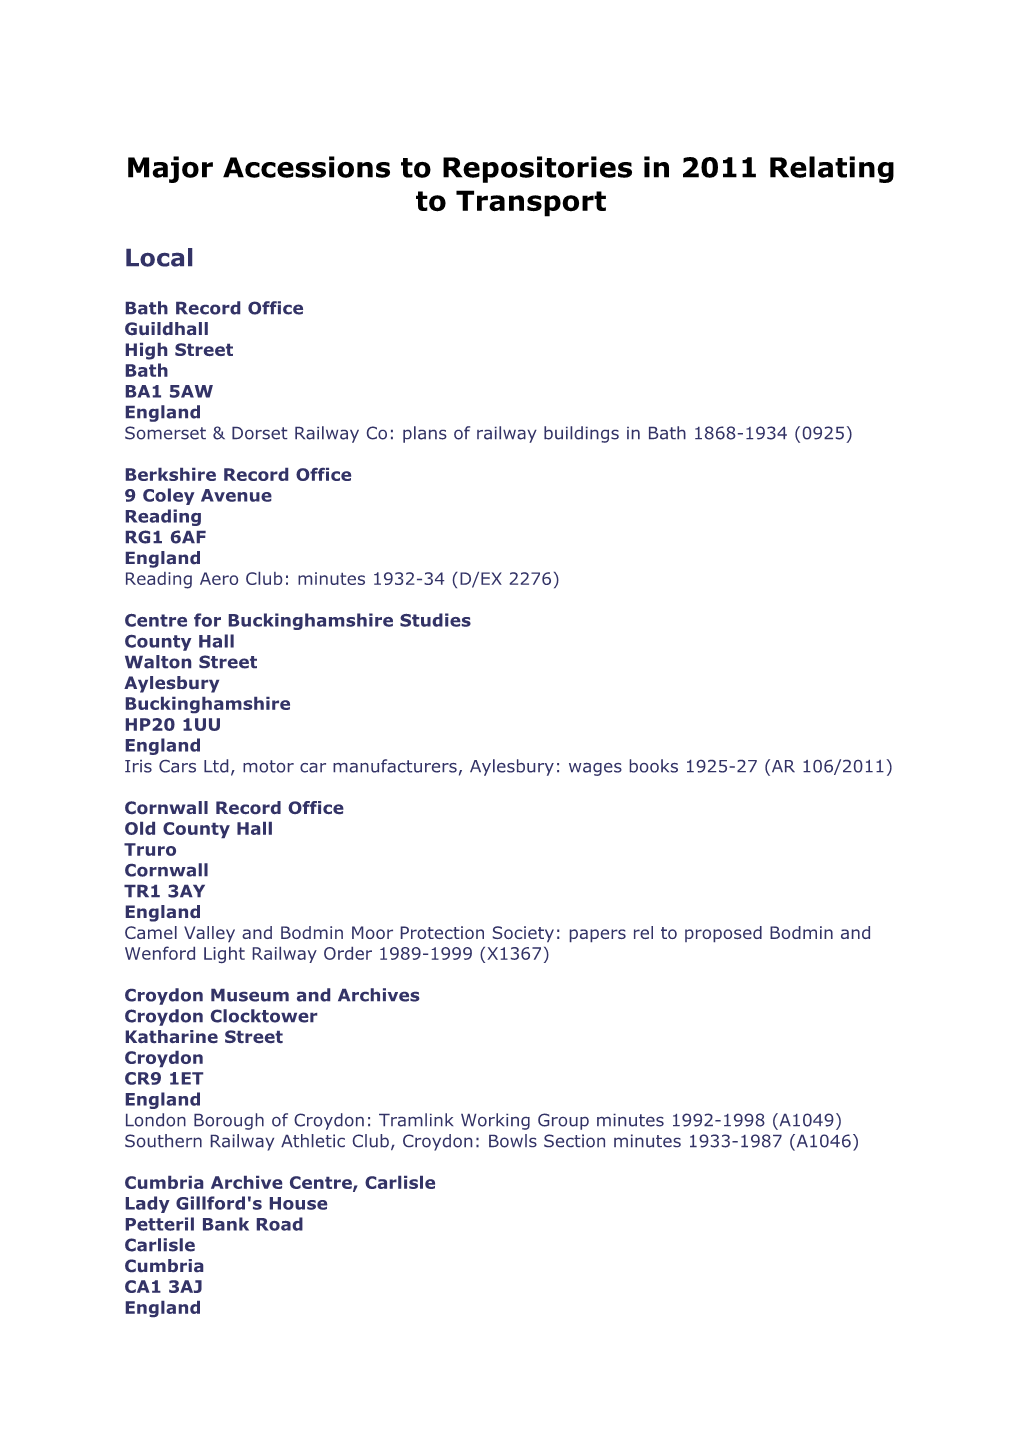 Major Accessions to Repositories in 2011 Relating to Transport